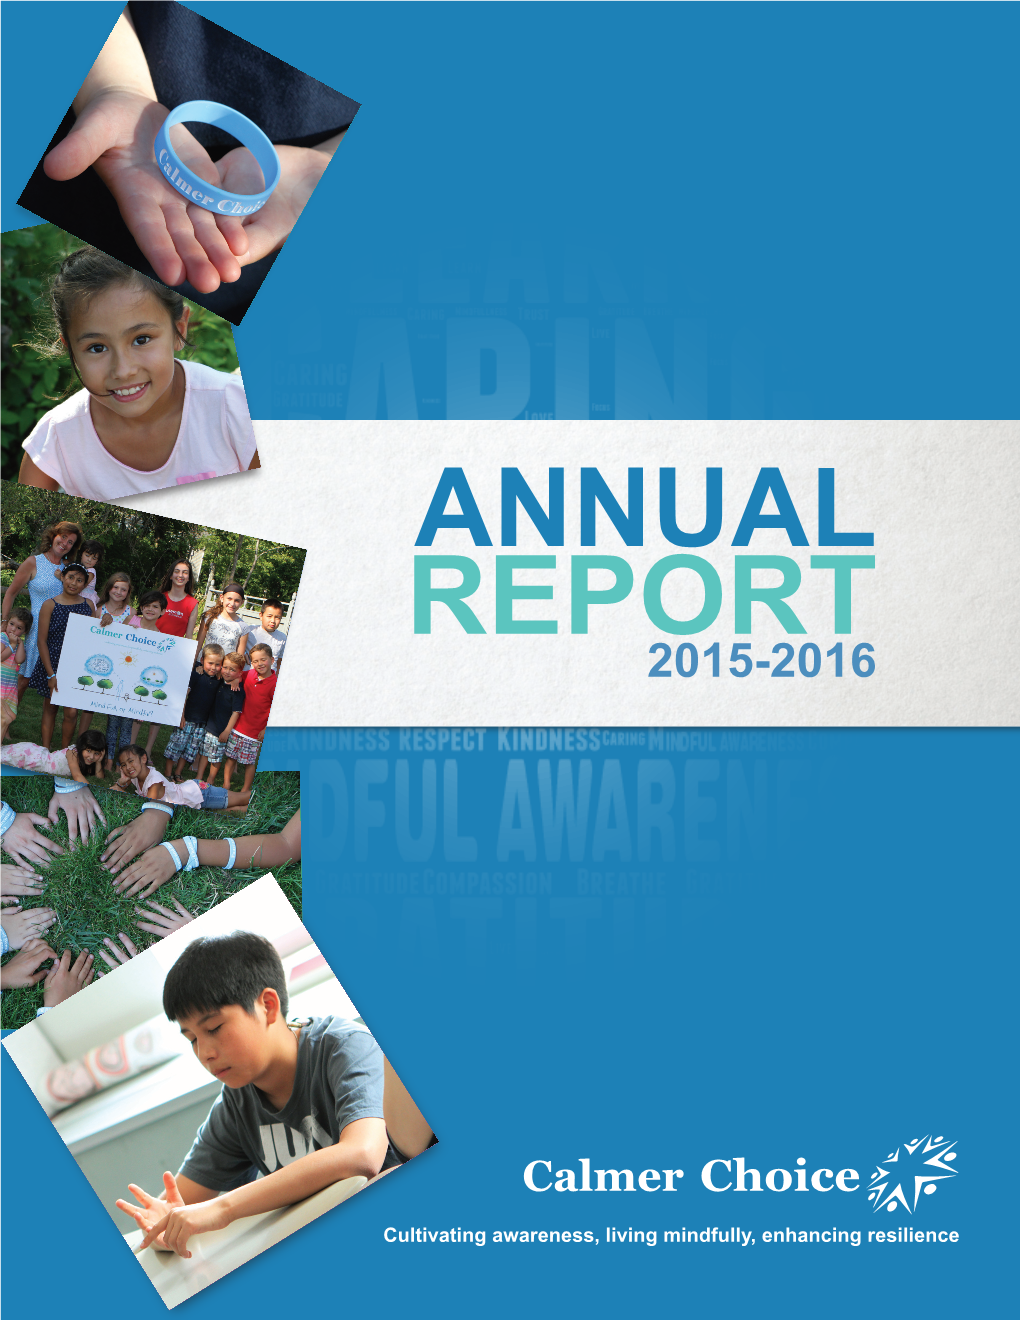 View the Annual Report